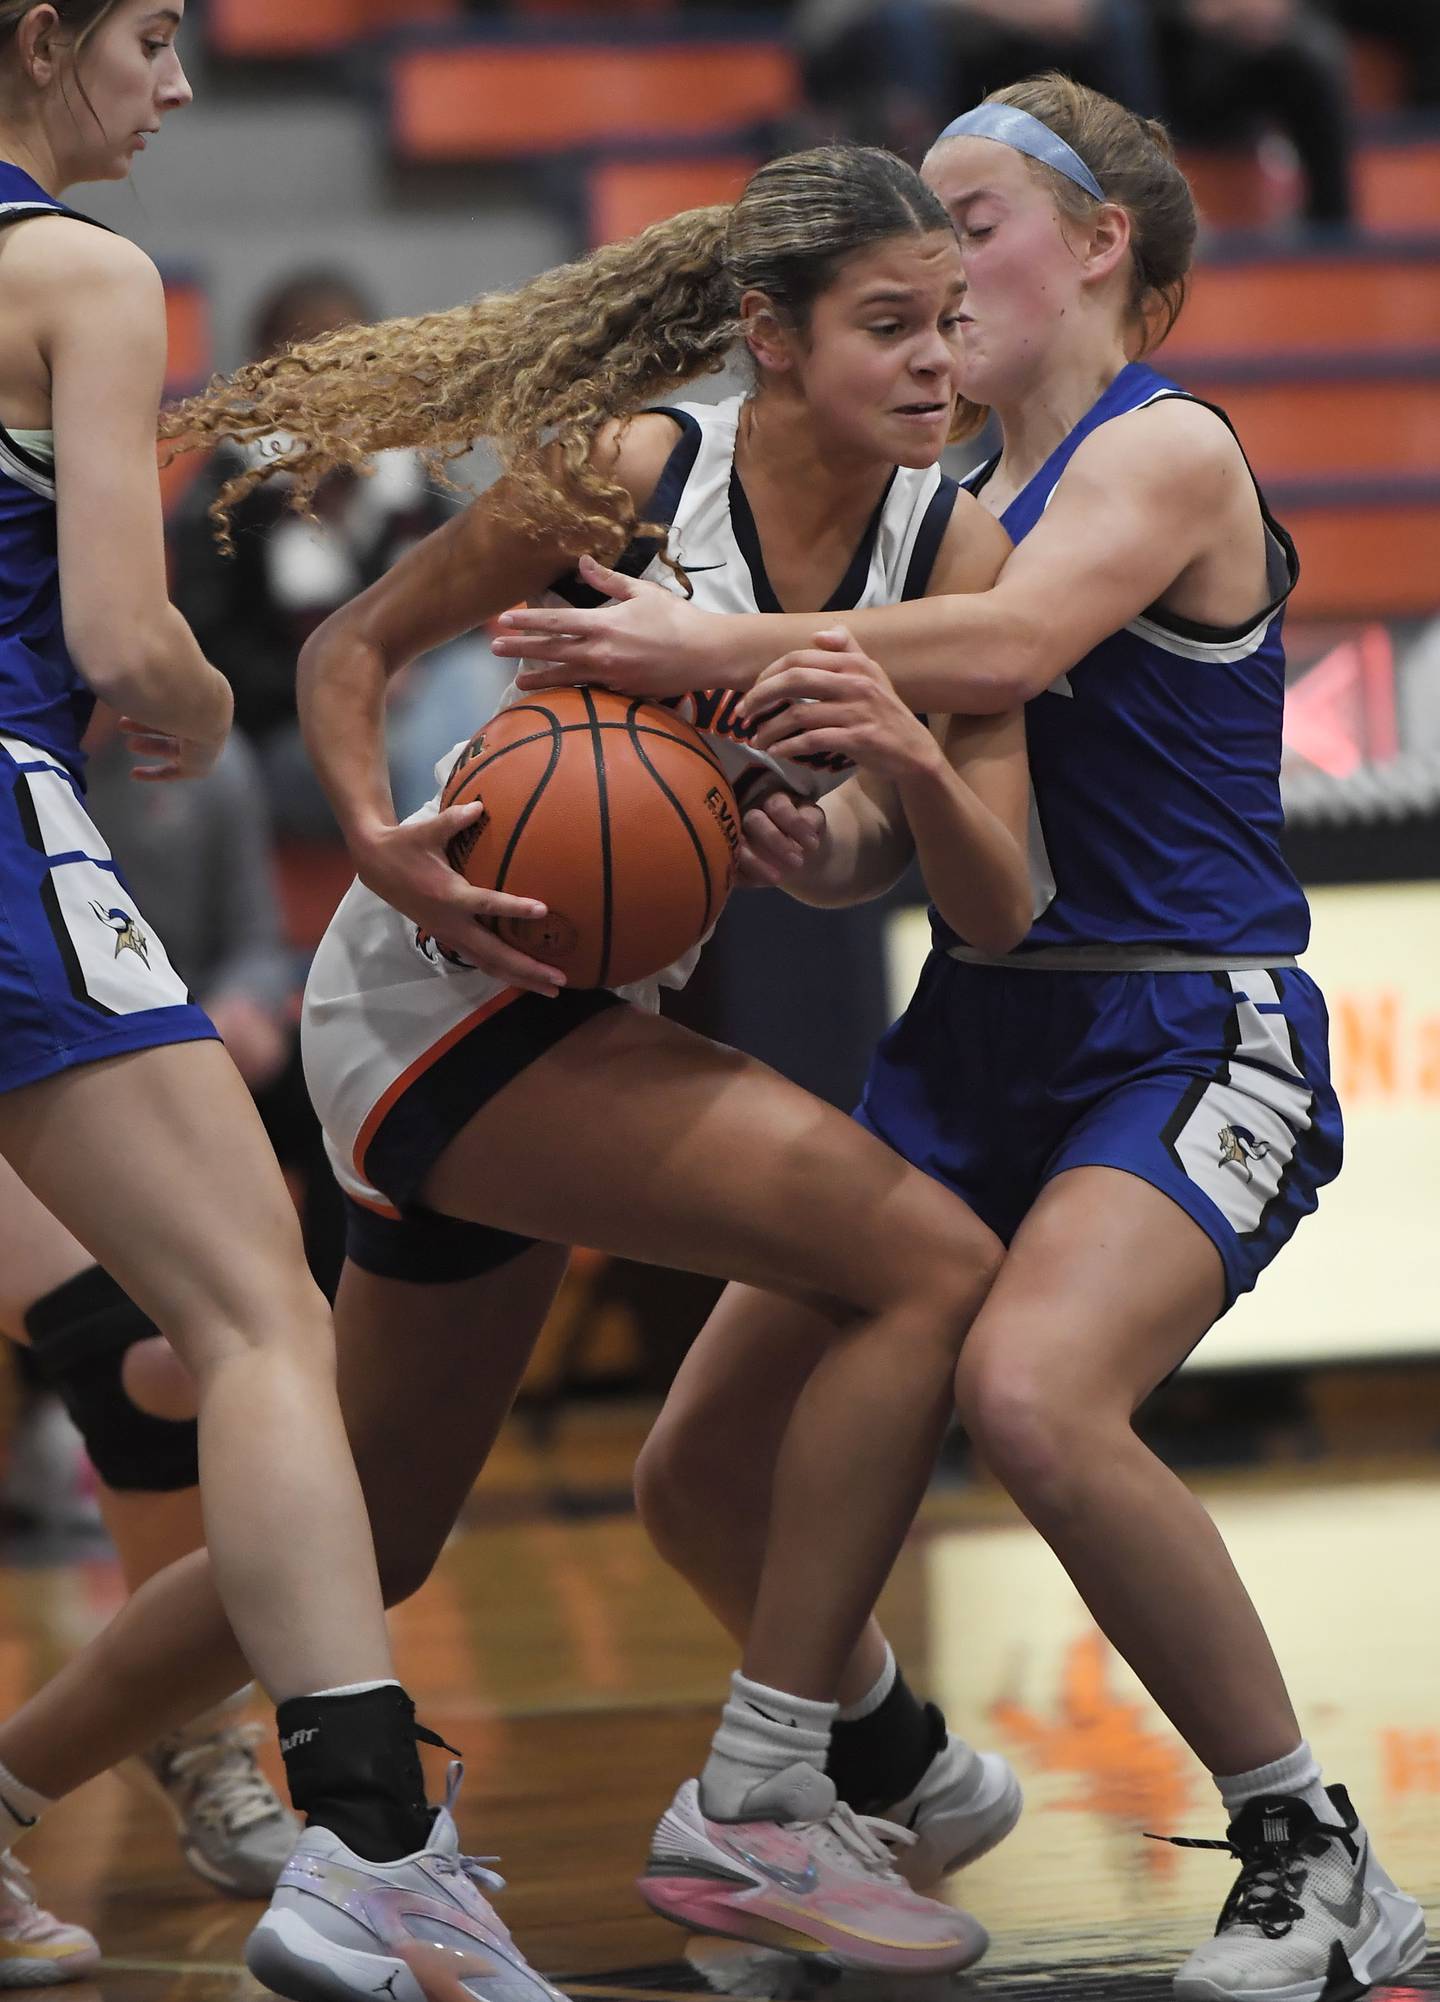 Naperville North’s Sydni Fink tries to get past Geneva’s Caroline Madden in a girls basketball game in Naperville on Tuesday, Nov. 28, 2023.